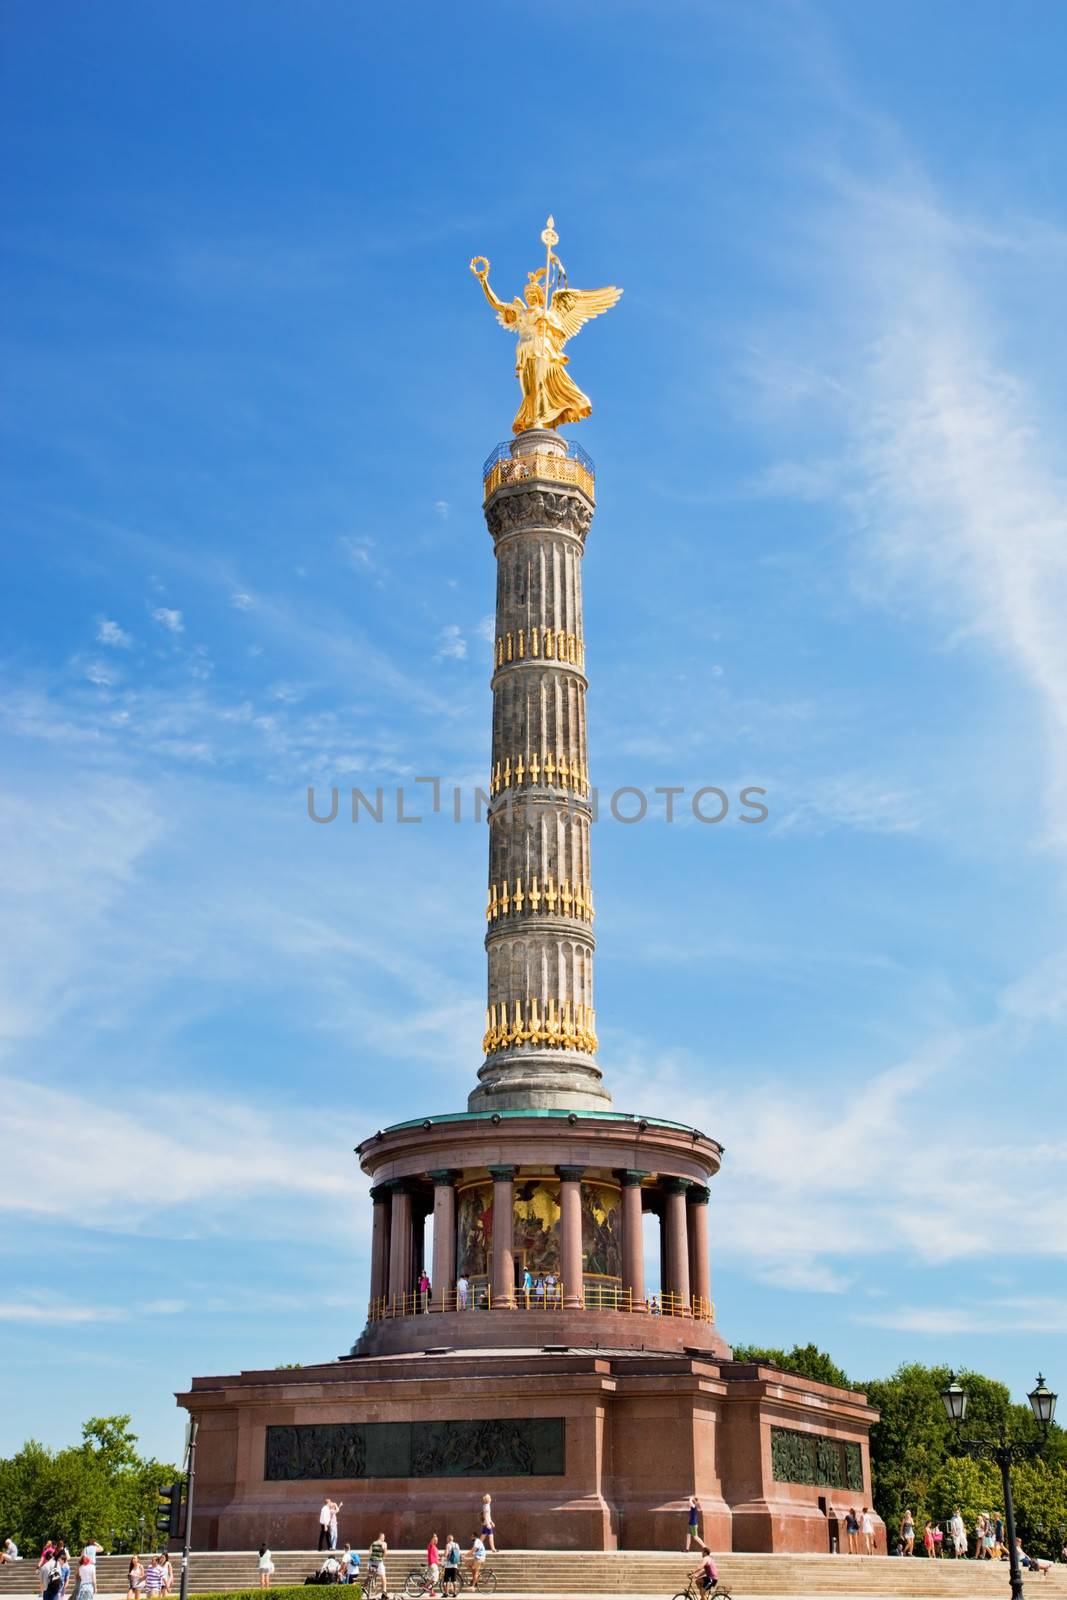 The Victory Column in Berlin, Germany. Berlin Siegessaule also called Goldelse